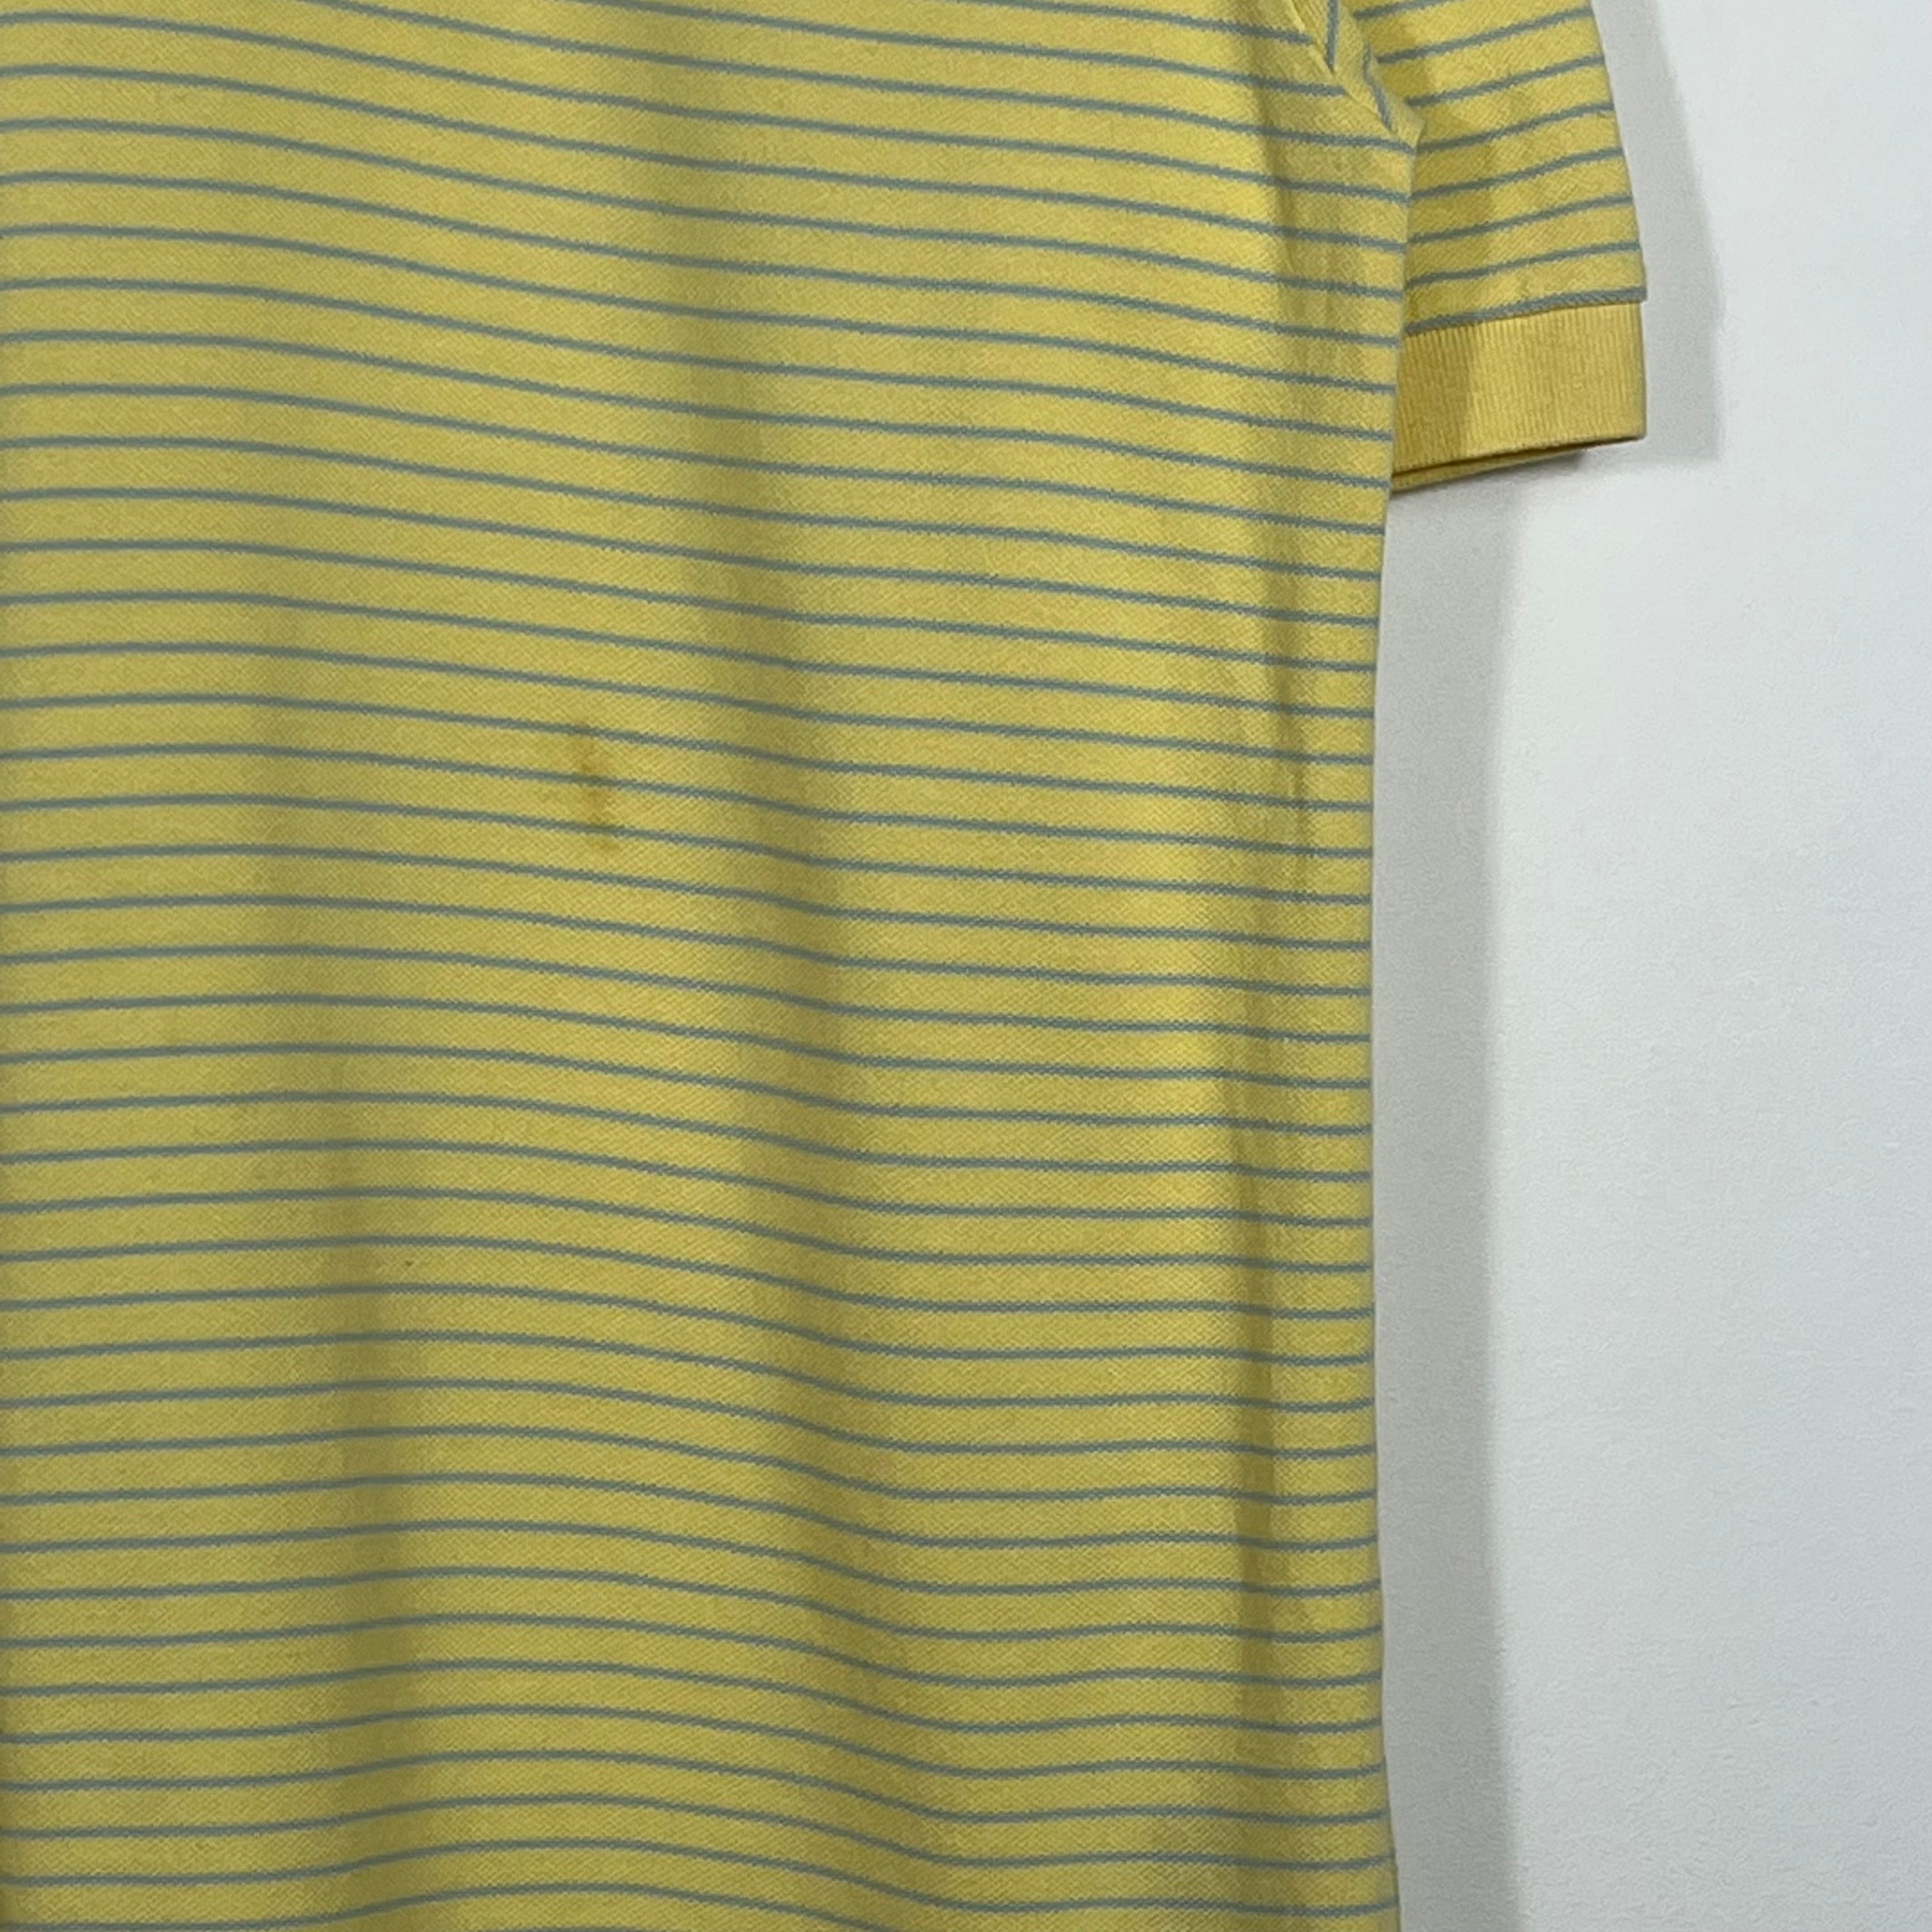 Nautica Striped Rugby Polo Shirt - Men's Large